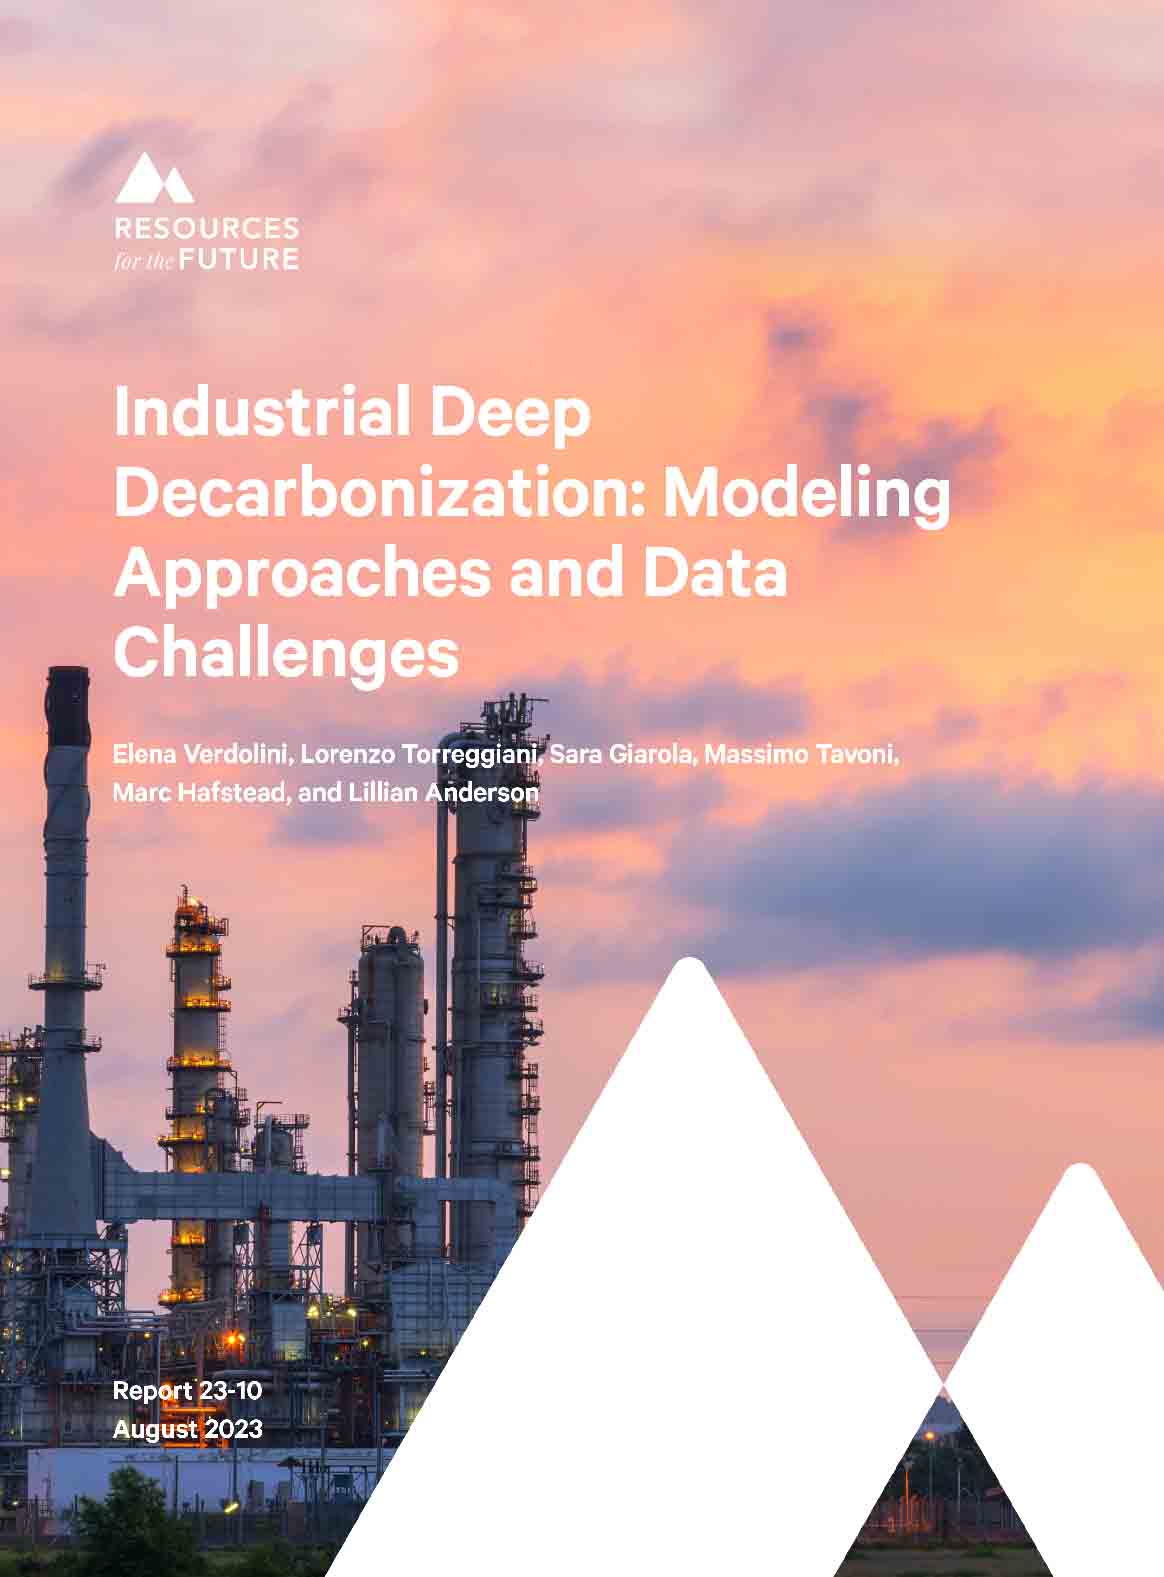 Industrial Deep Decarbonization Modeling Approaches and Data Challenges